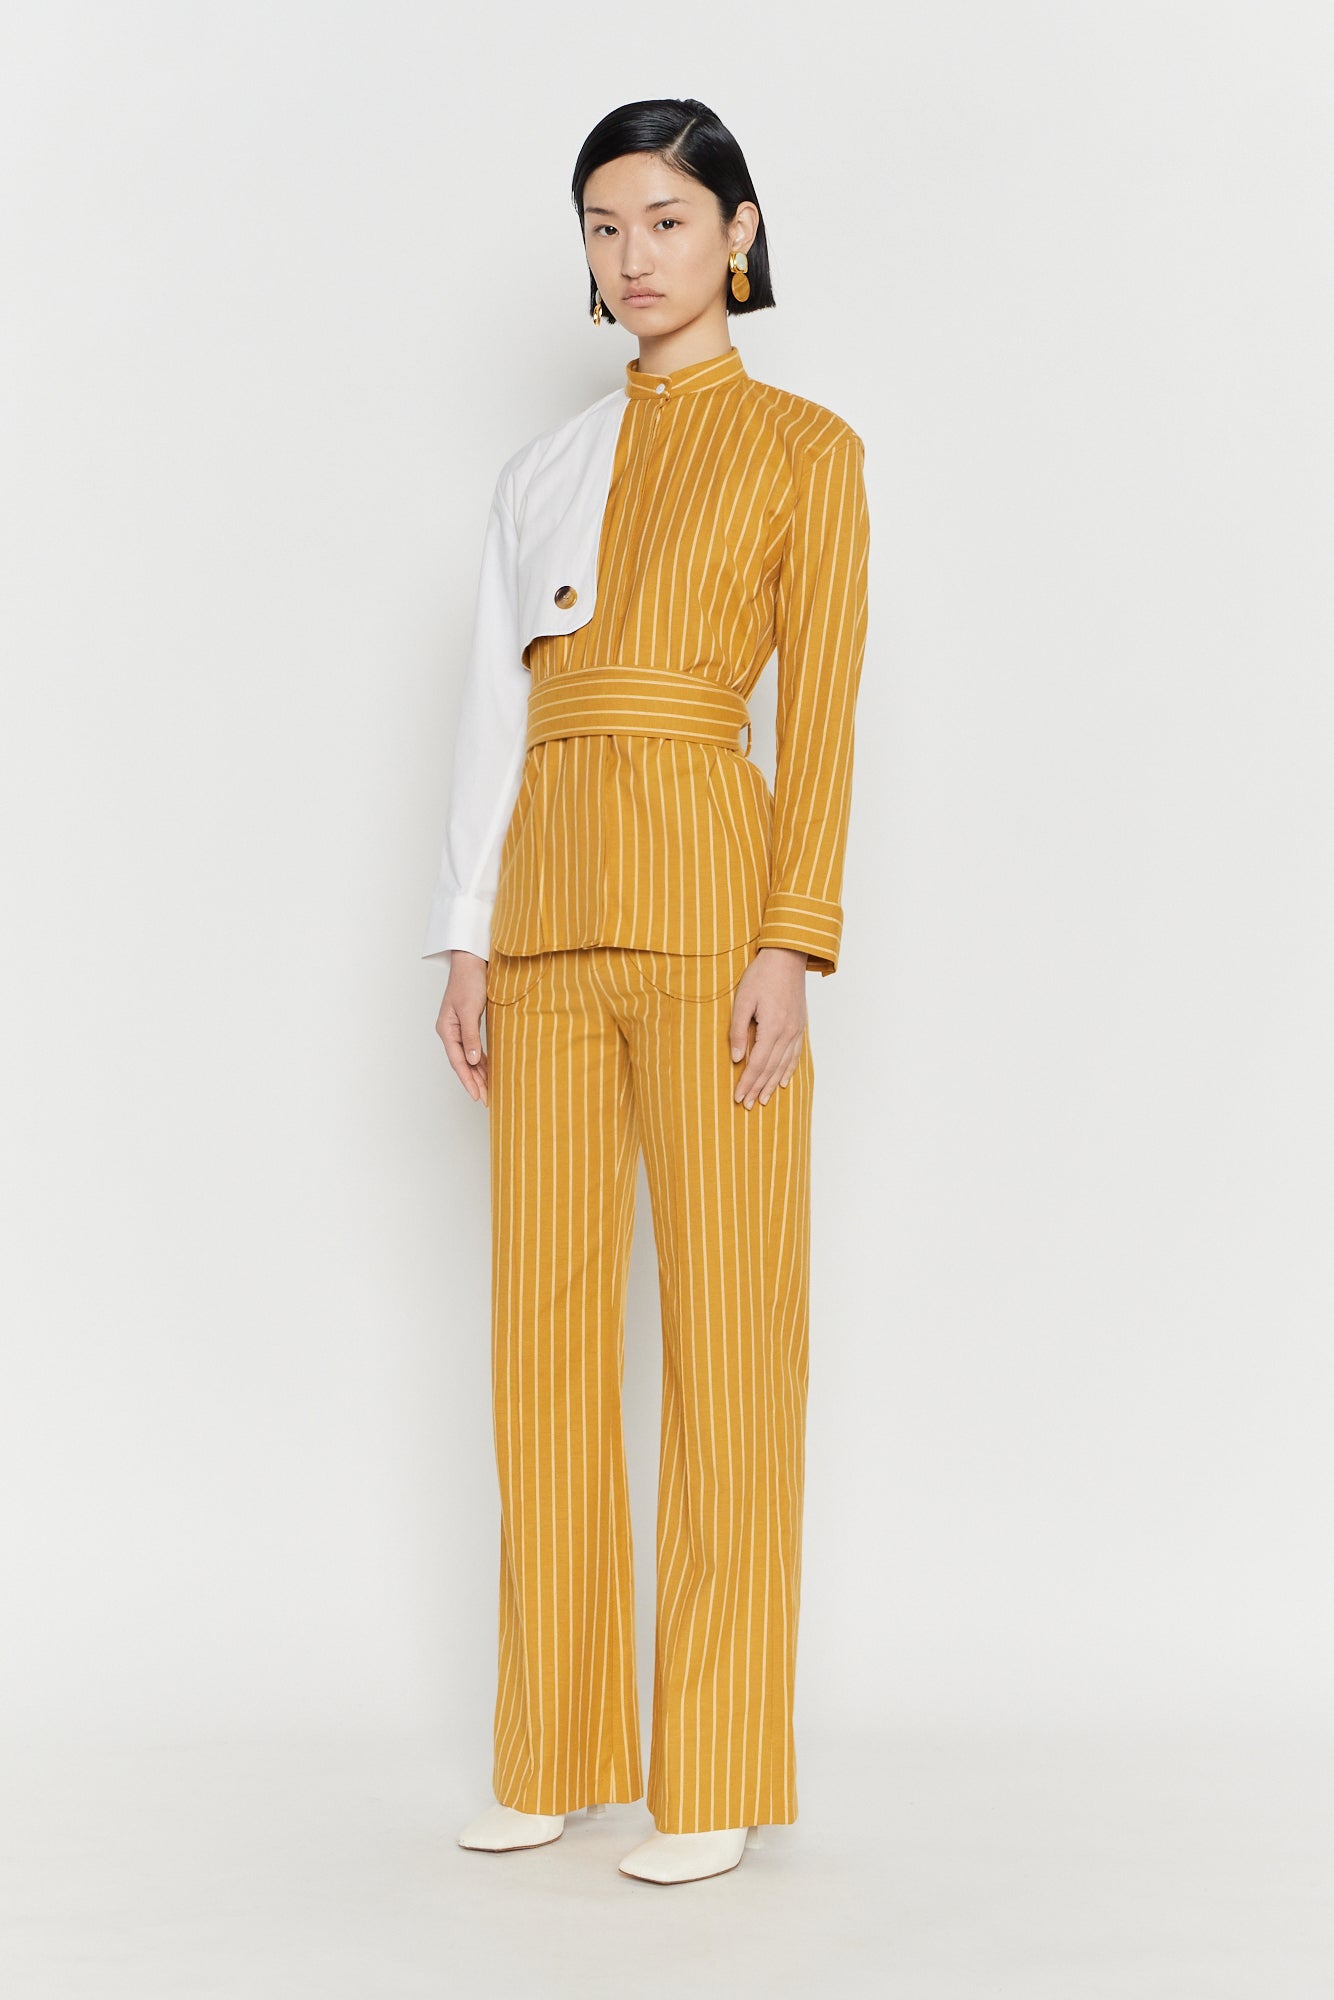 Mustard Striped Shirt with White Sleeve